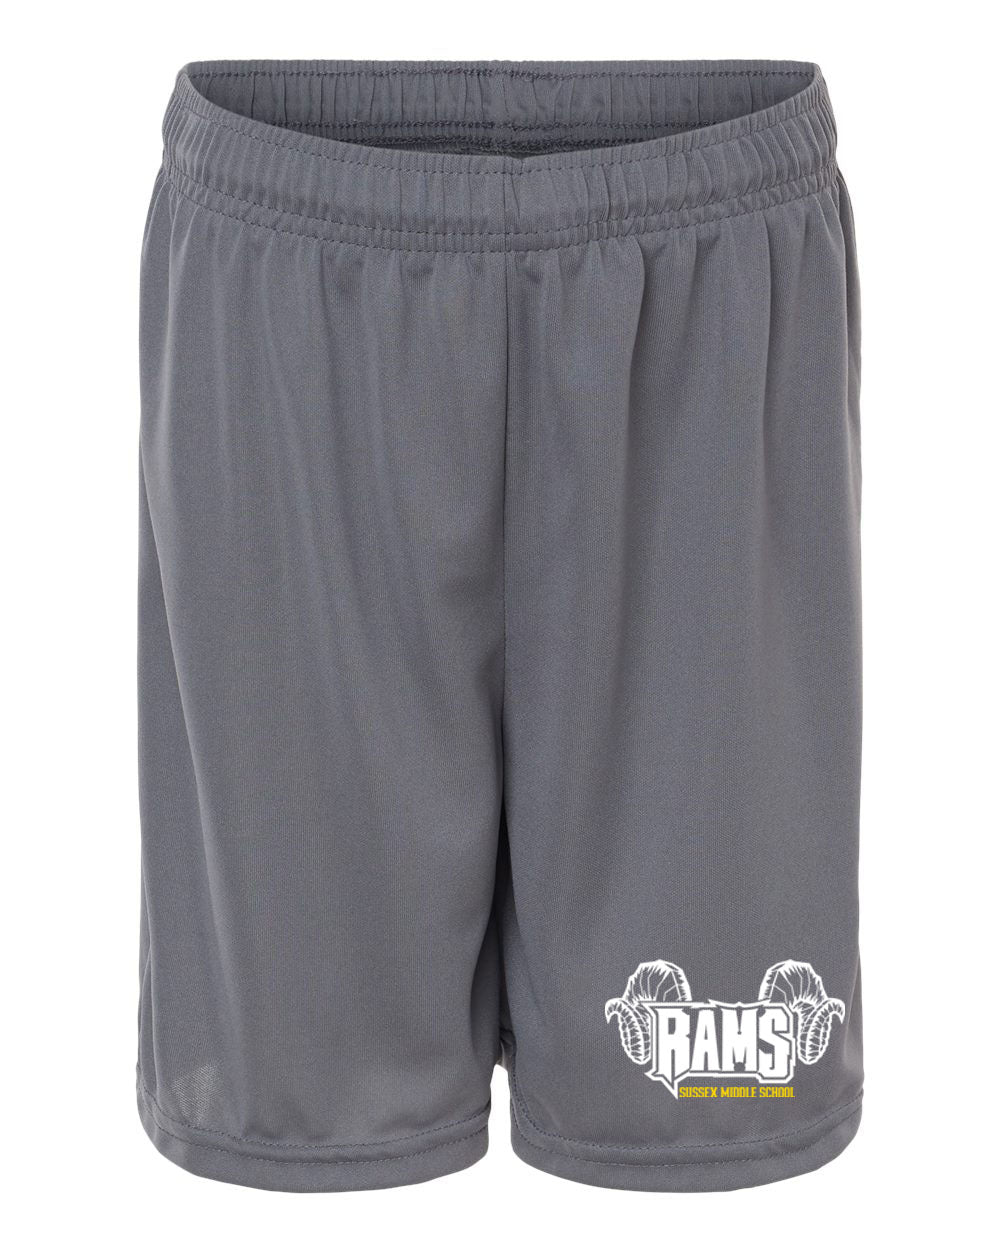 Sussex Middle Design 1 Performance Shorts